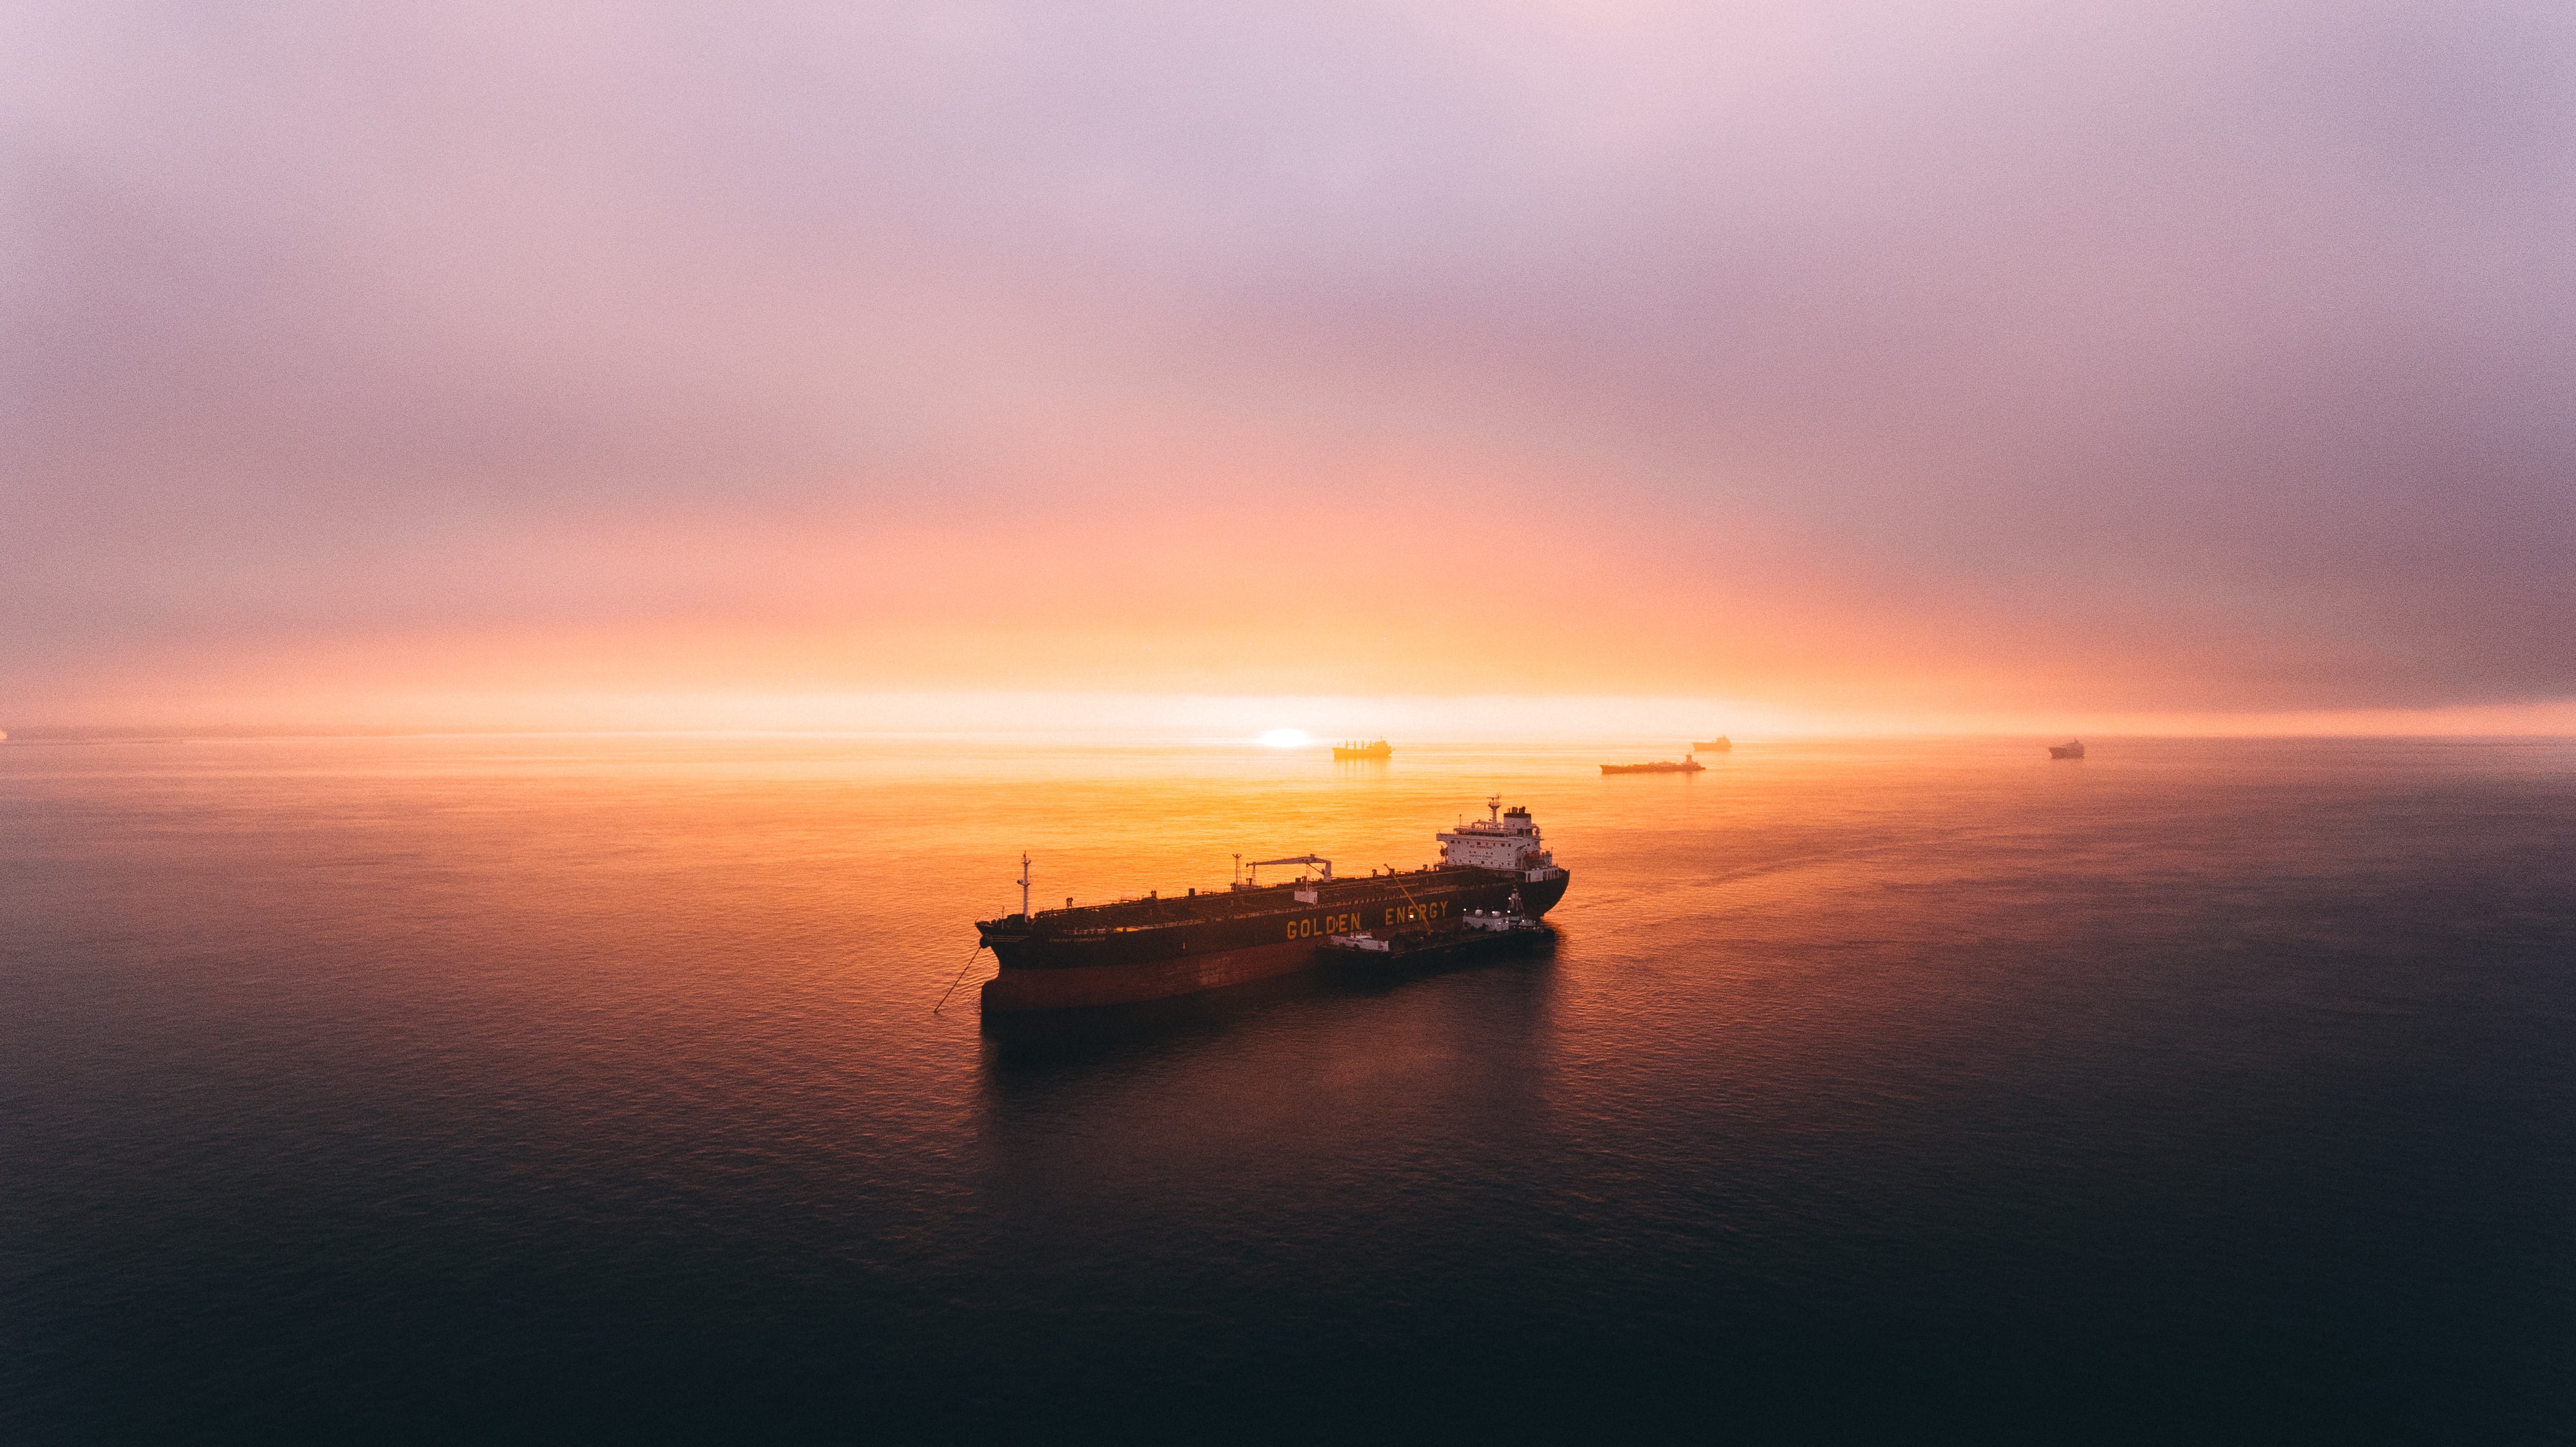 The Benefits of Using Satellite Communications for Maritime Safety: Ensuring Secure, Efficient, and Sustainable Operations